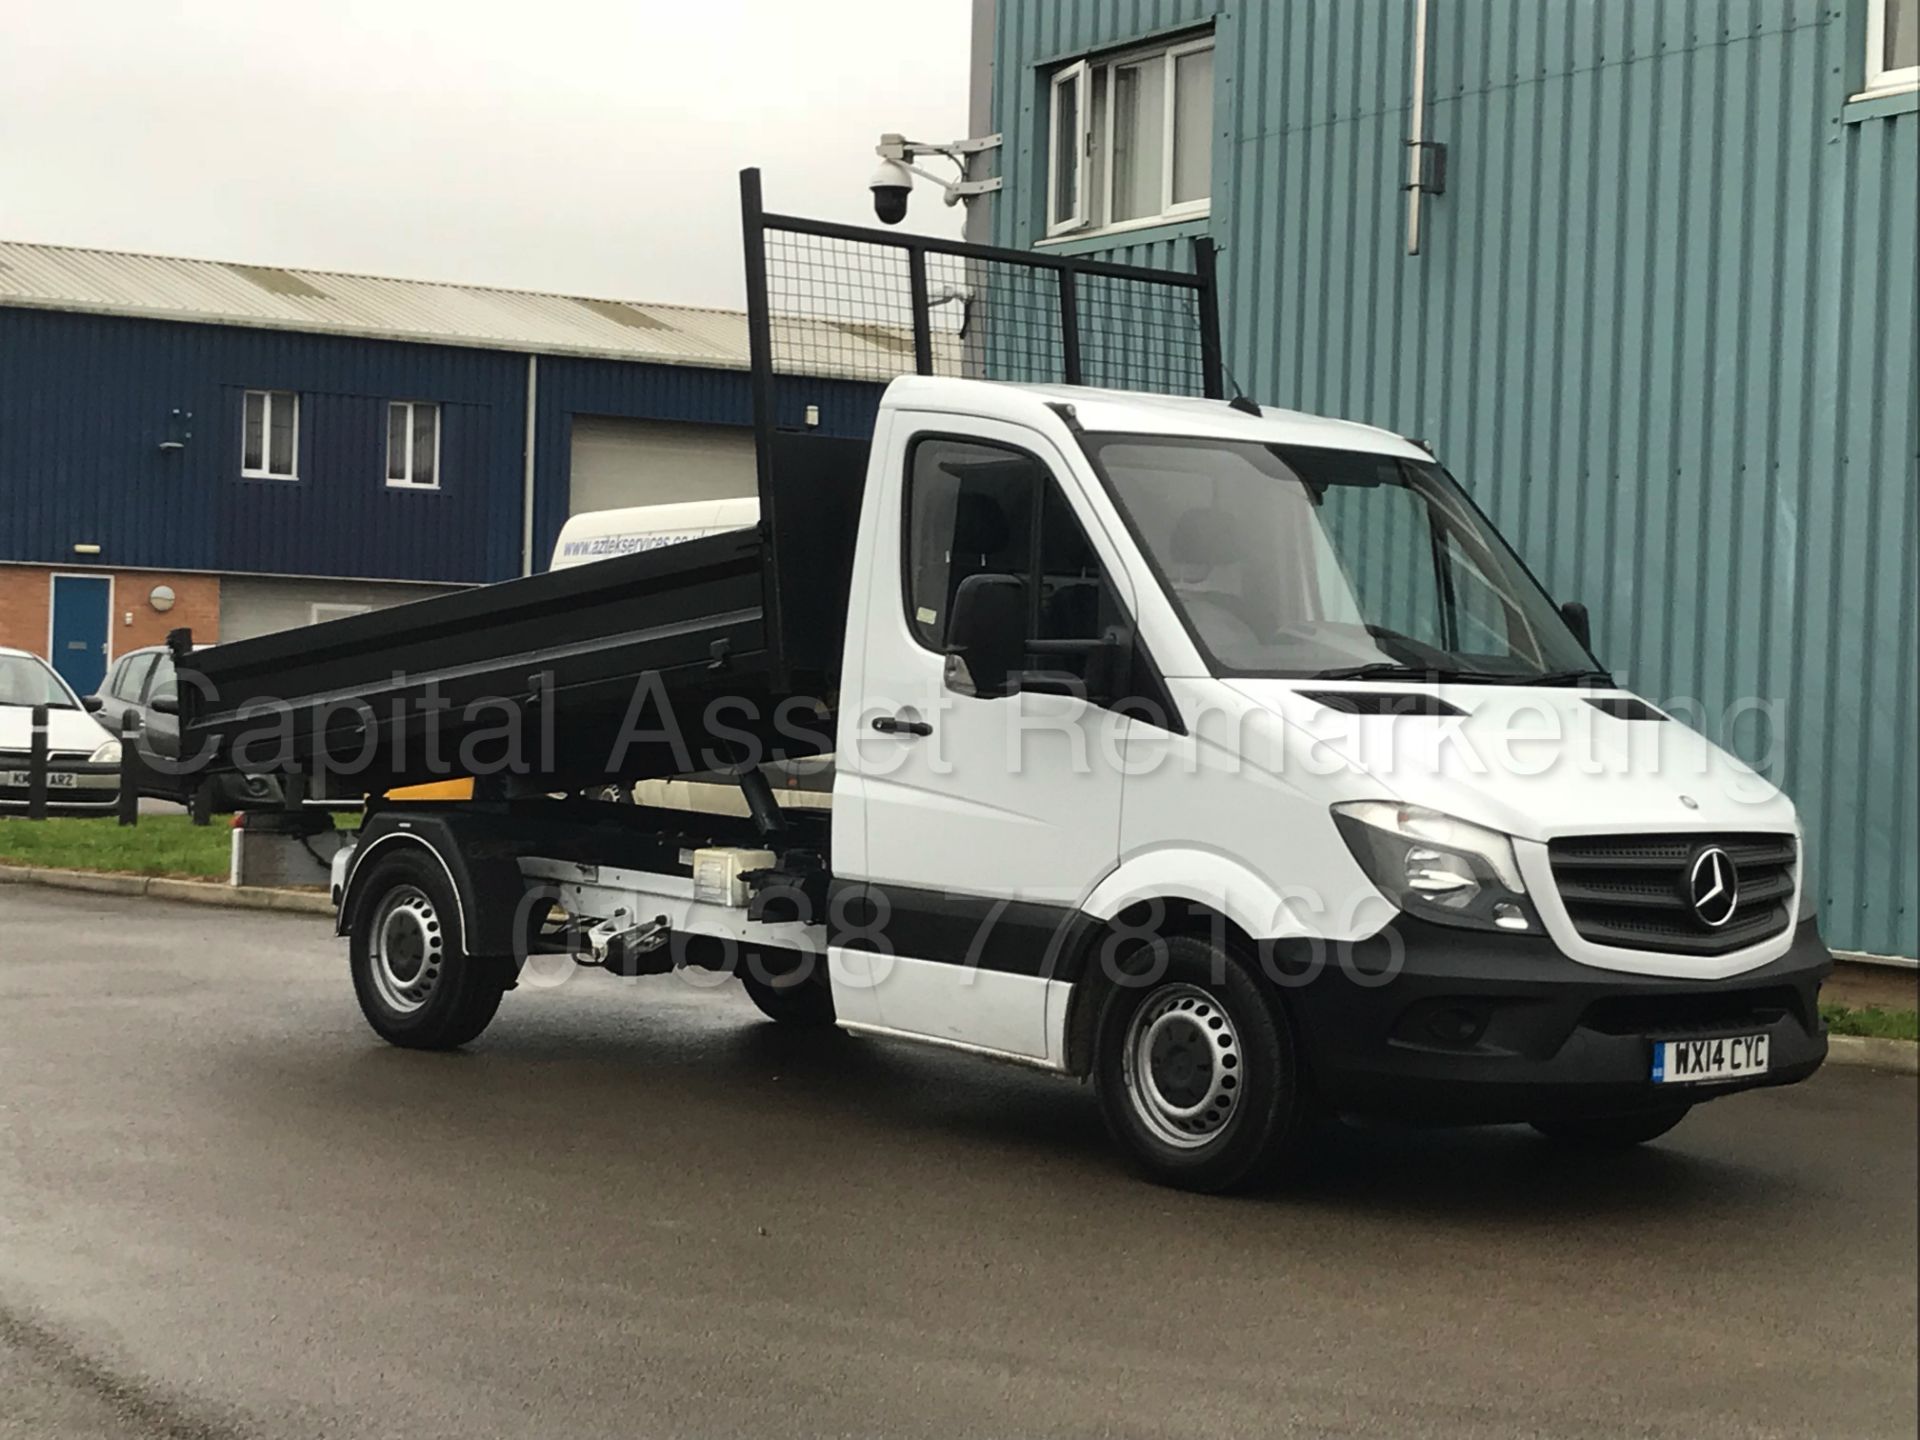 (ON SALE) MERCEDES-BENZ SPRINTER 313 CDI 'LWB - TIPPER' (2014 FACELIFT) '130 BHP -6 SPEED' *1 OWNER* - Image 8 of 24